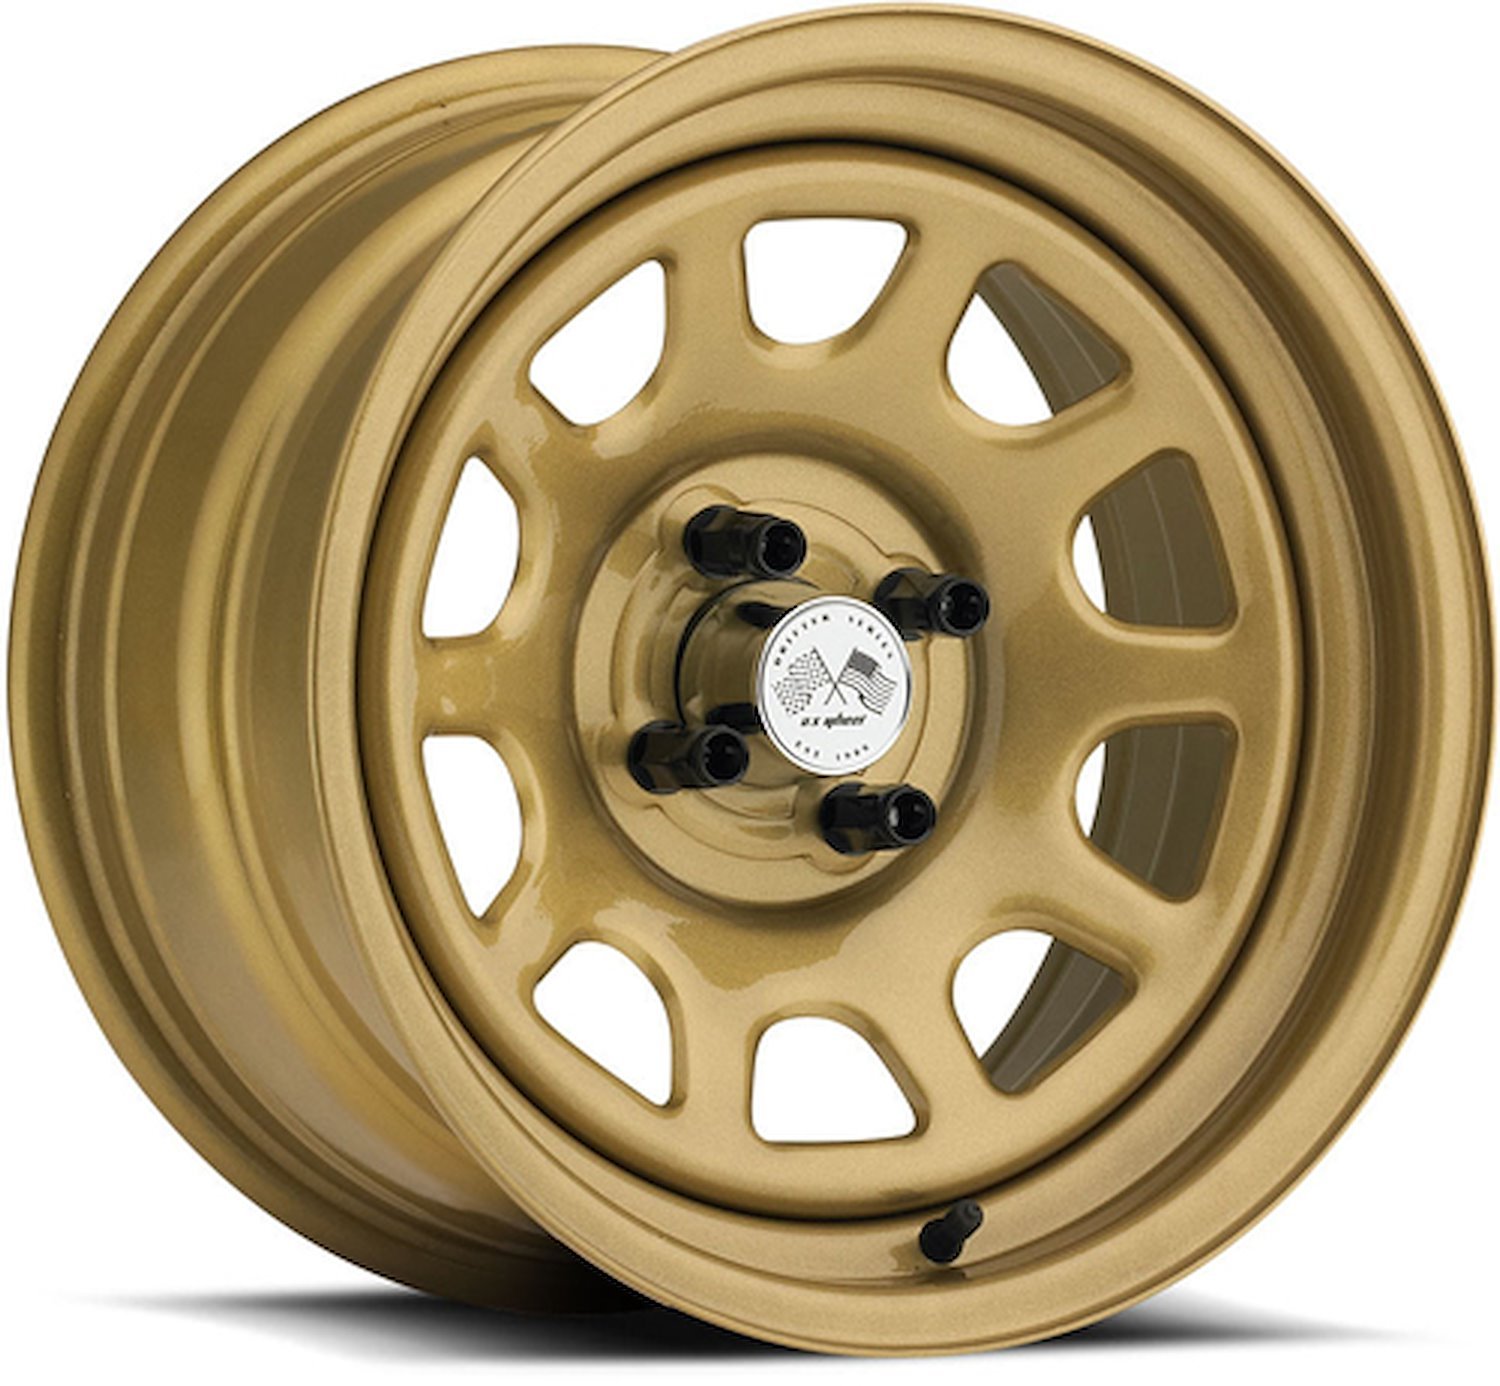 PAINTED DAYTONA FWD DRIFTER GOLD 15 x 7 4 x 4.25 Bolt Circle 45 Back Spacing +12 offset 266 Center Bore 1400 lbs Load Rating